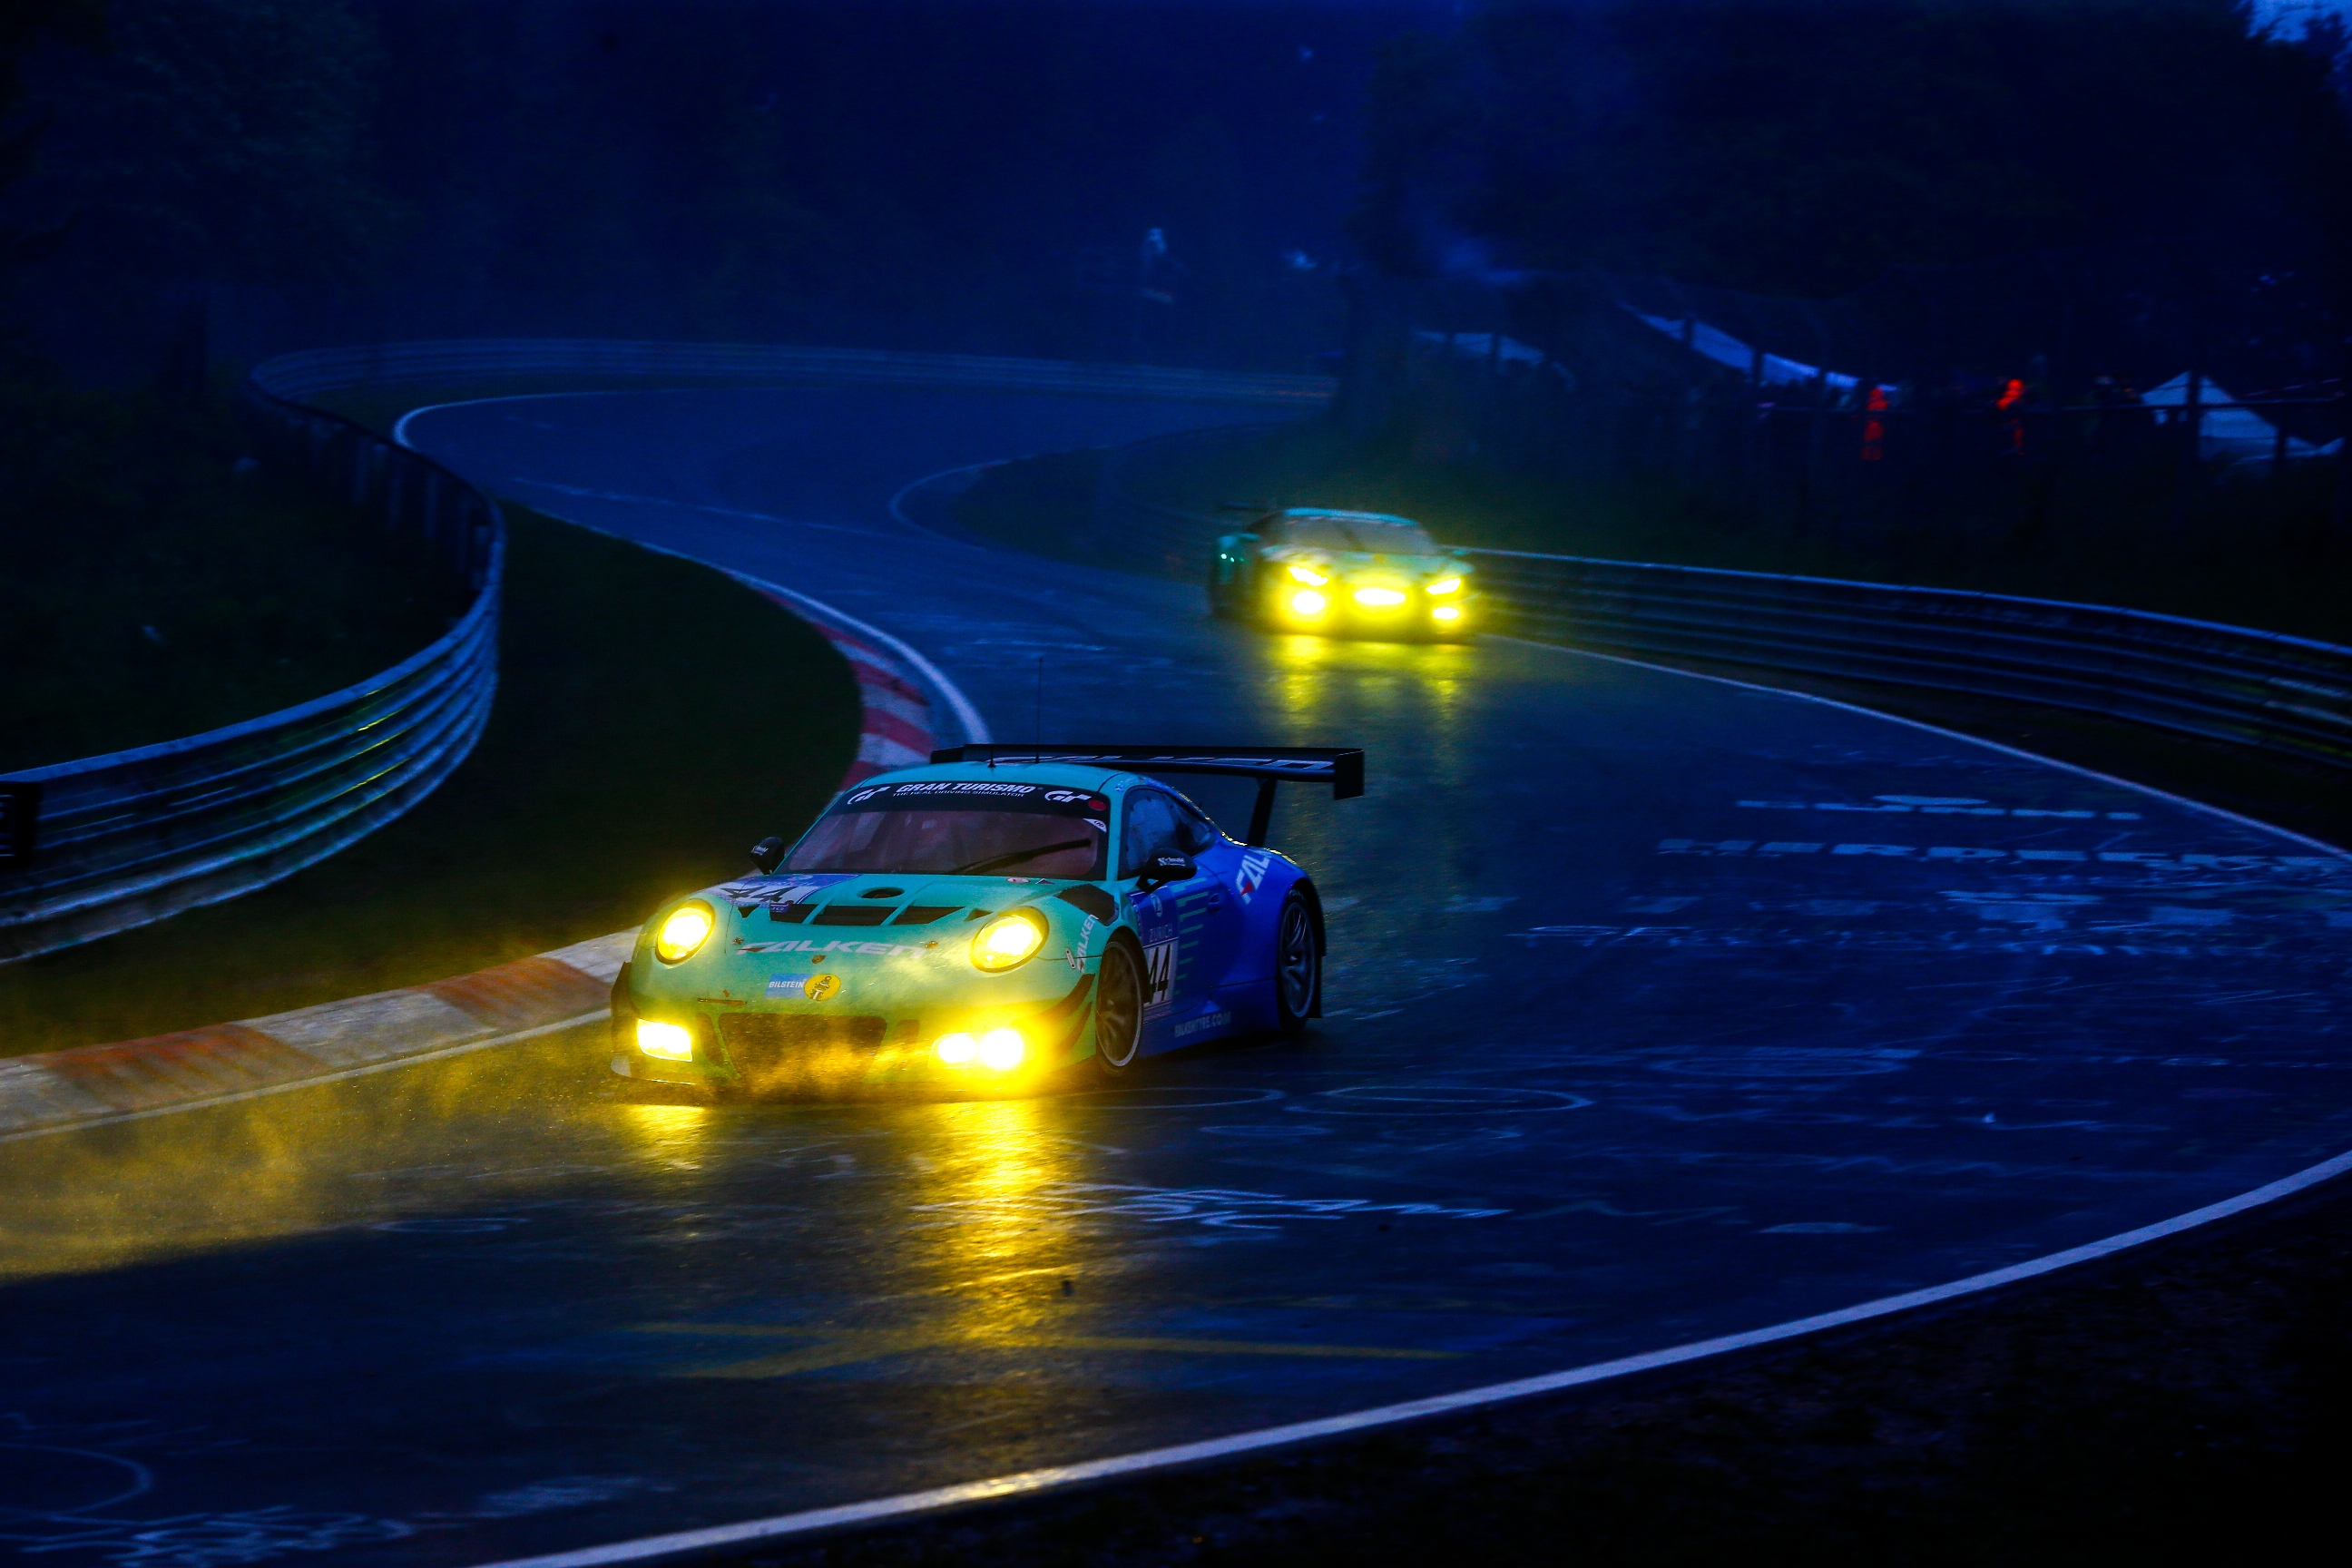 Falken achieves top 10 finish, class victory in Nürburgring 24 Hours